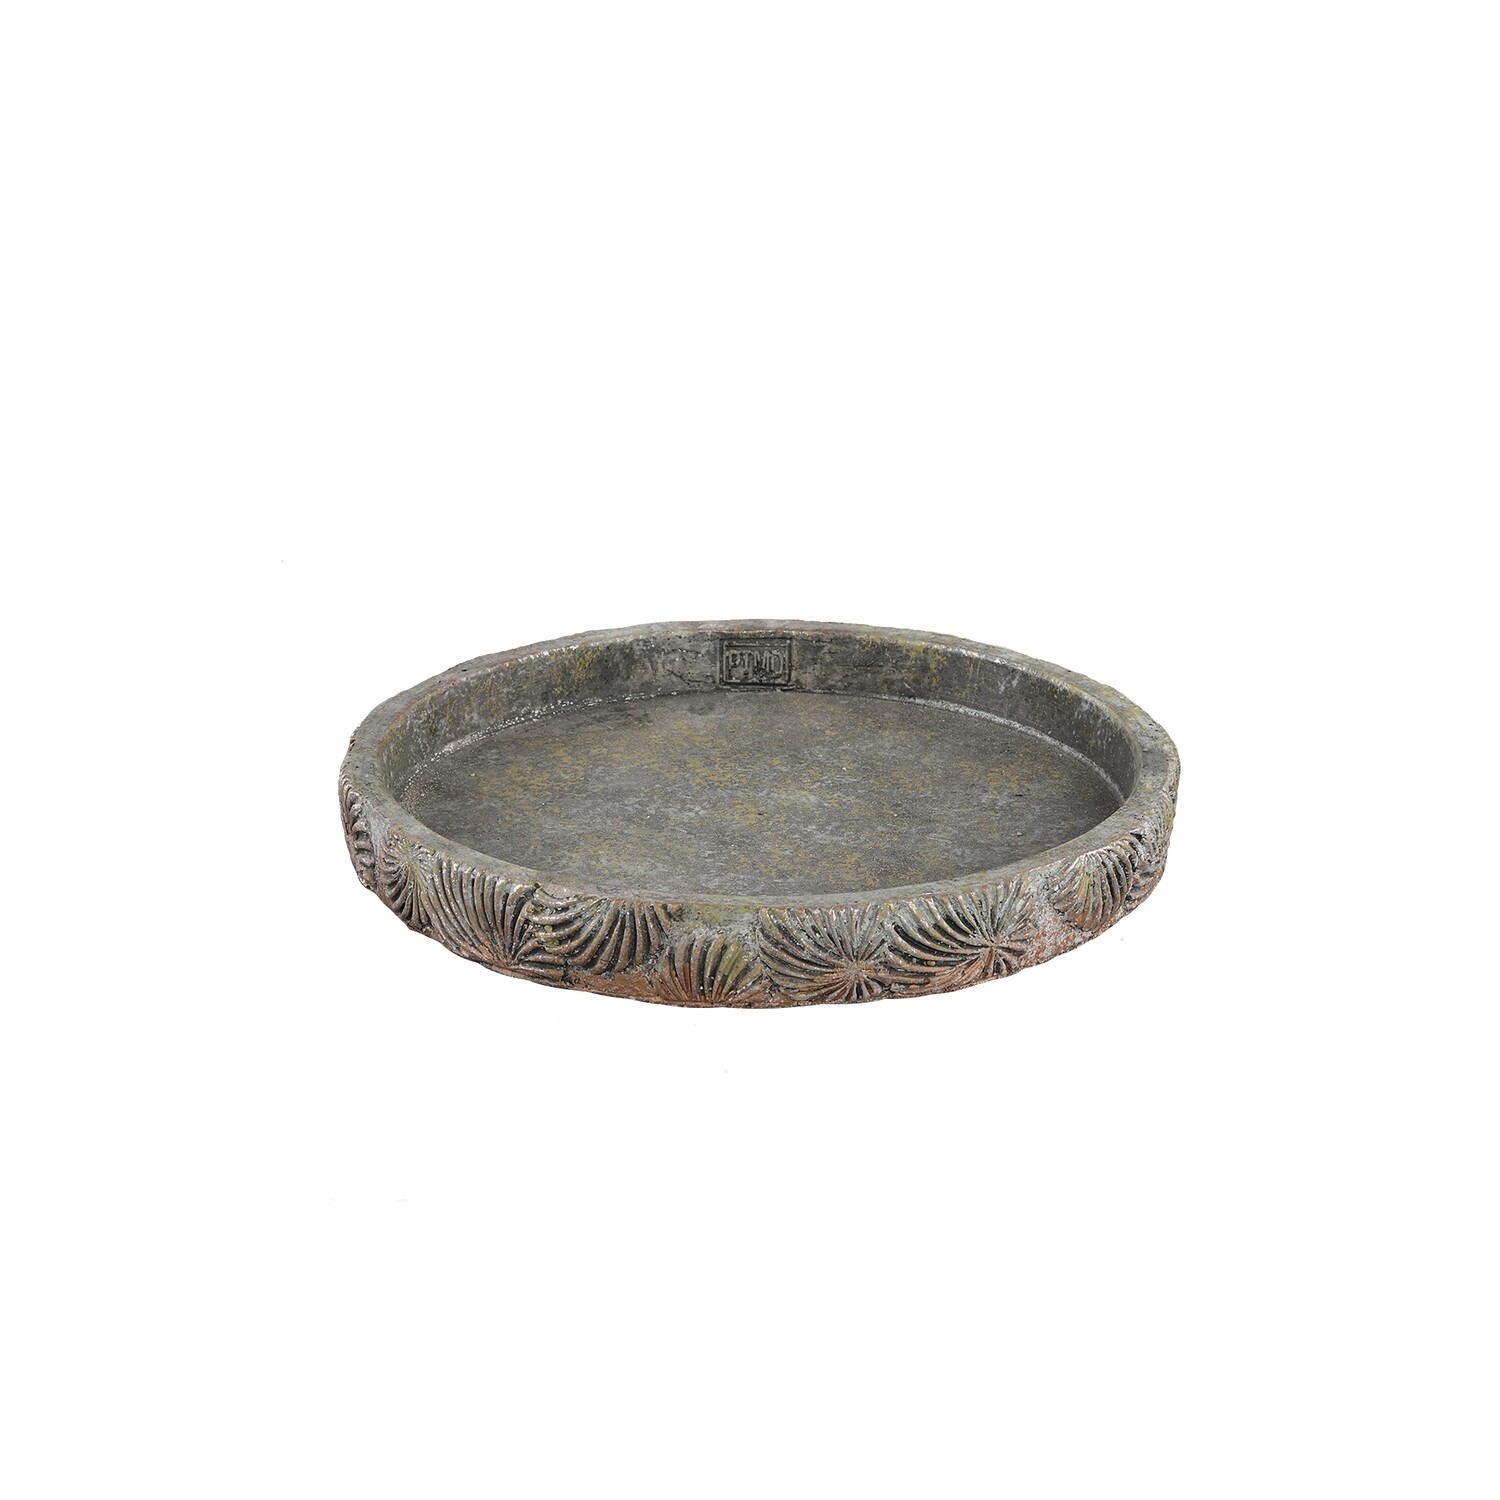 Laxxi Green cement bowl flower pattern round S